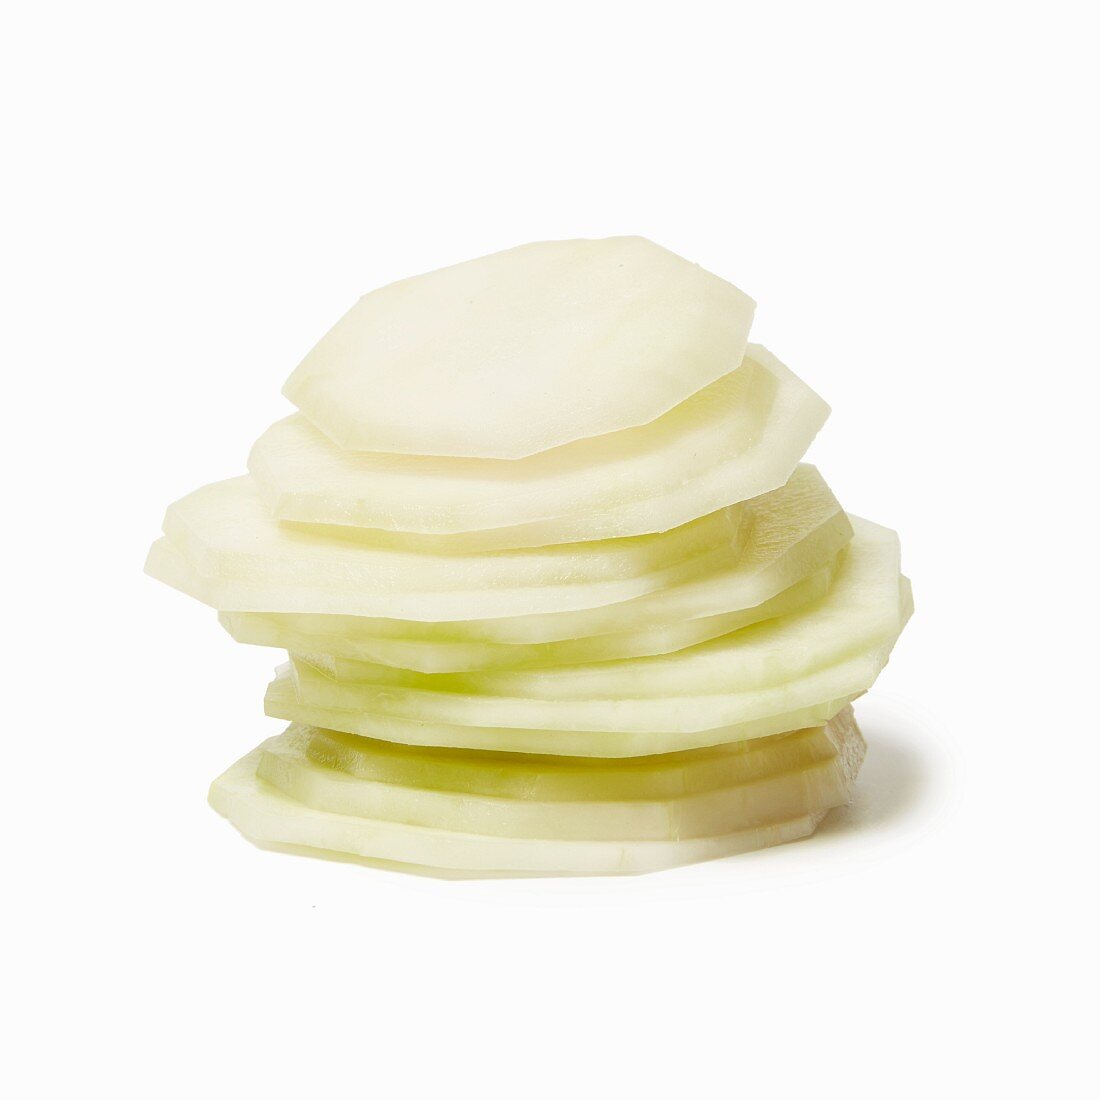 A stack of kohlrabi slices in front of a white background